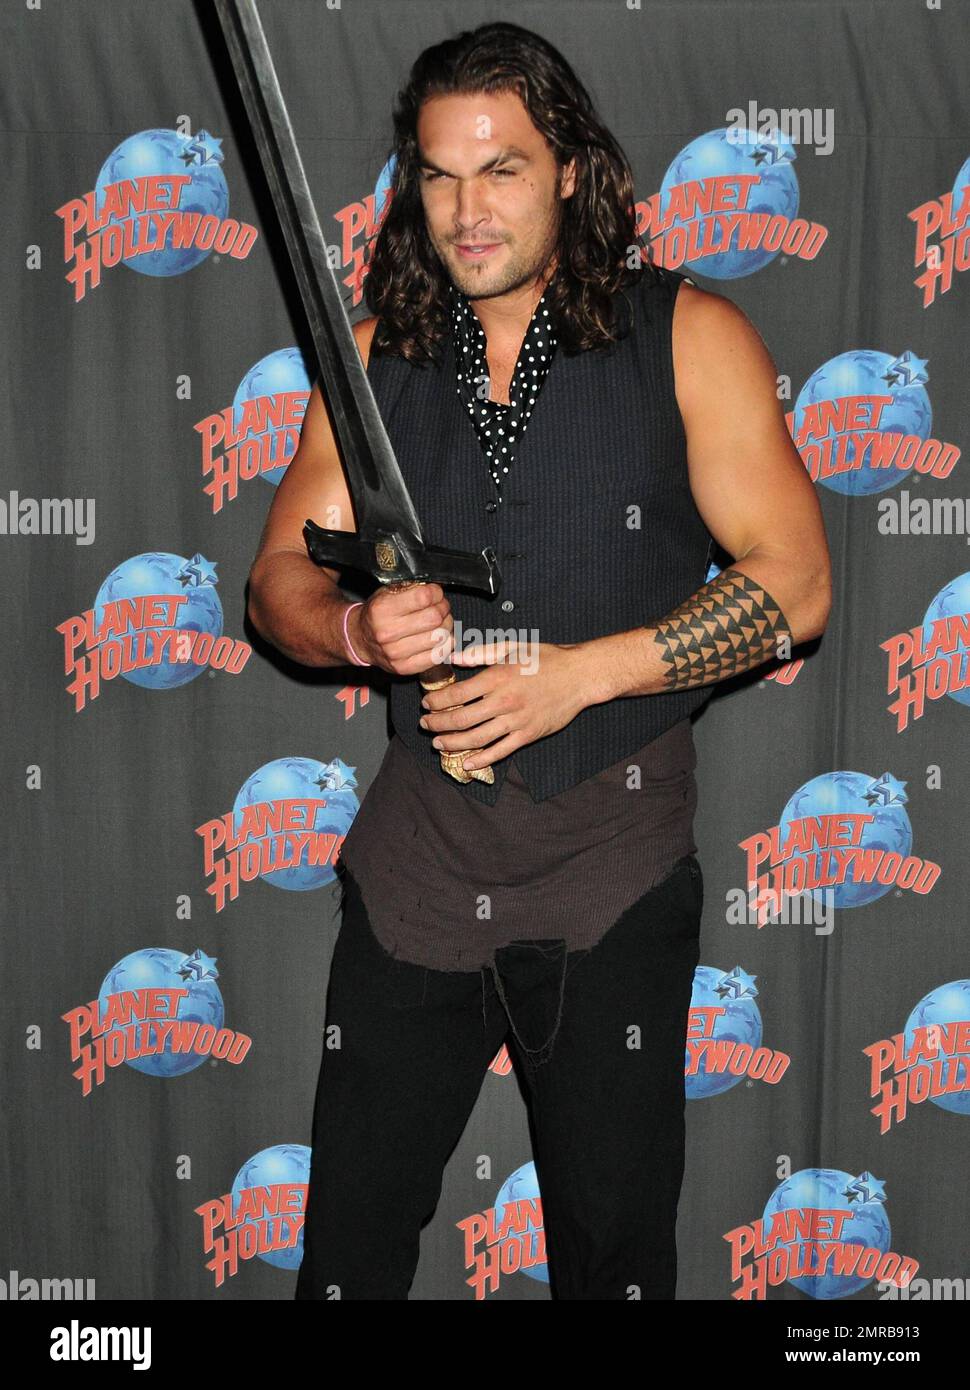 Jason Momoa promotes his starring role in 'Conan the Barbarian' with a hand print ceremony at Planet Hollywood in Times Square.  New York, NY. 18th August 2011. Stock Photo